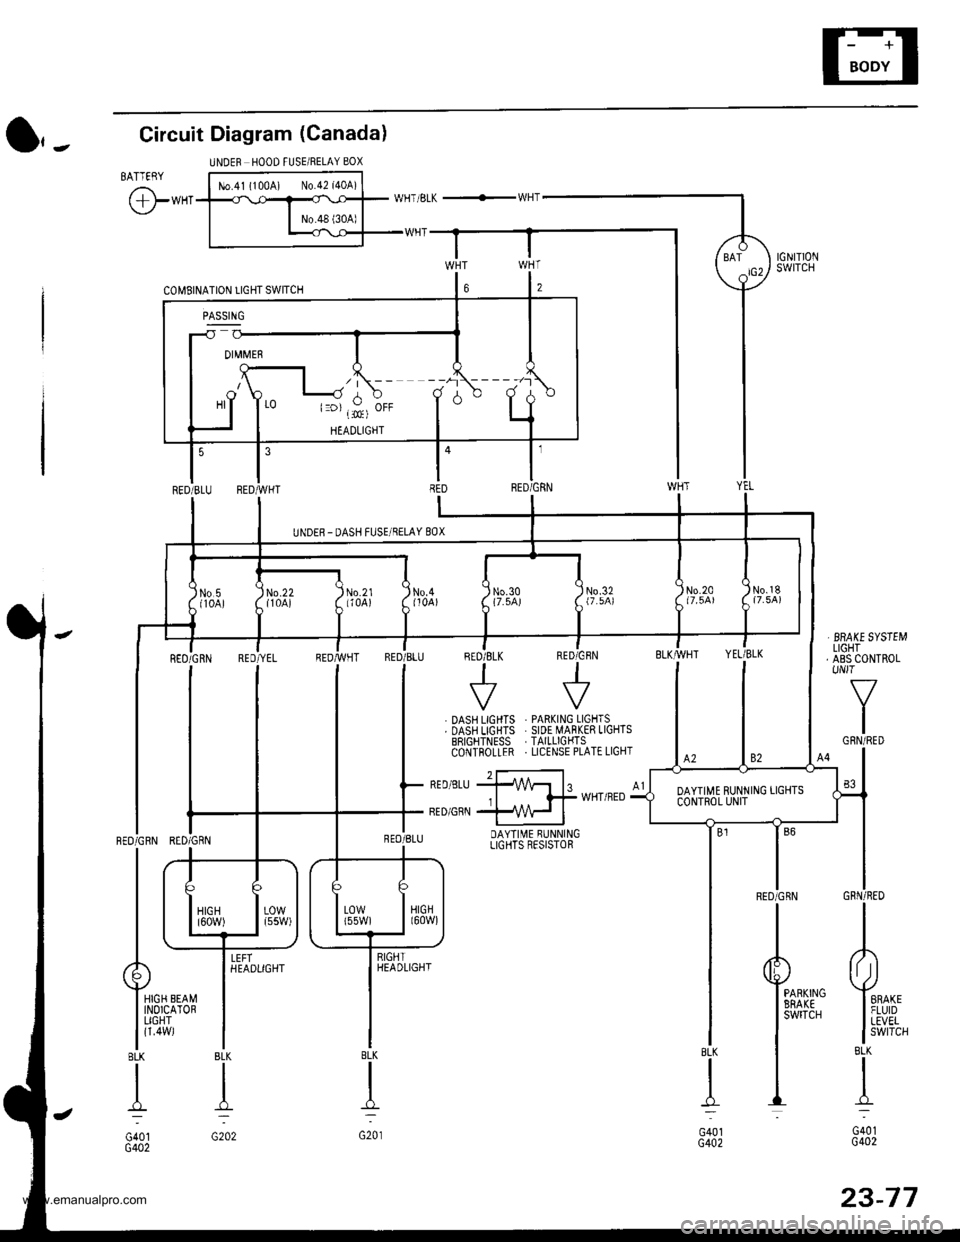 HONDA CR-V 1998 RD1-RD3 / 1.G User Guide 
UNDER HOOD FUSEiRELAY 80X
WHT/BLK +WHT
c0t\48rNATroN UGHT SWITCH
4
RED
HIGH BEAMINOICATORLIGHT
l=o) , :., oFF
O,-Circuit Diagram (Canada)
BATTEBY
@*"
UNDER- DASH FUSE/RELAY 8OX
BBAXE SYSTEMLIGHTABS C